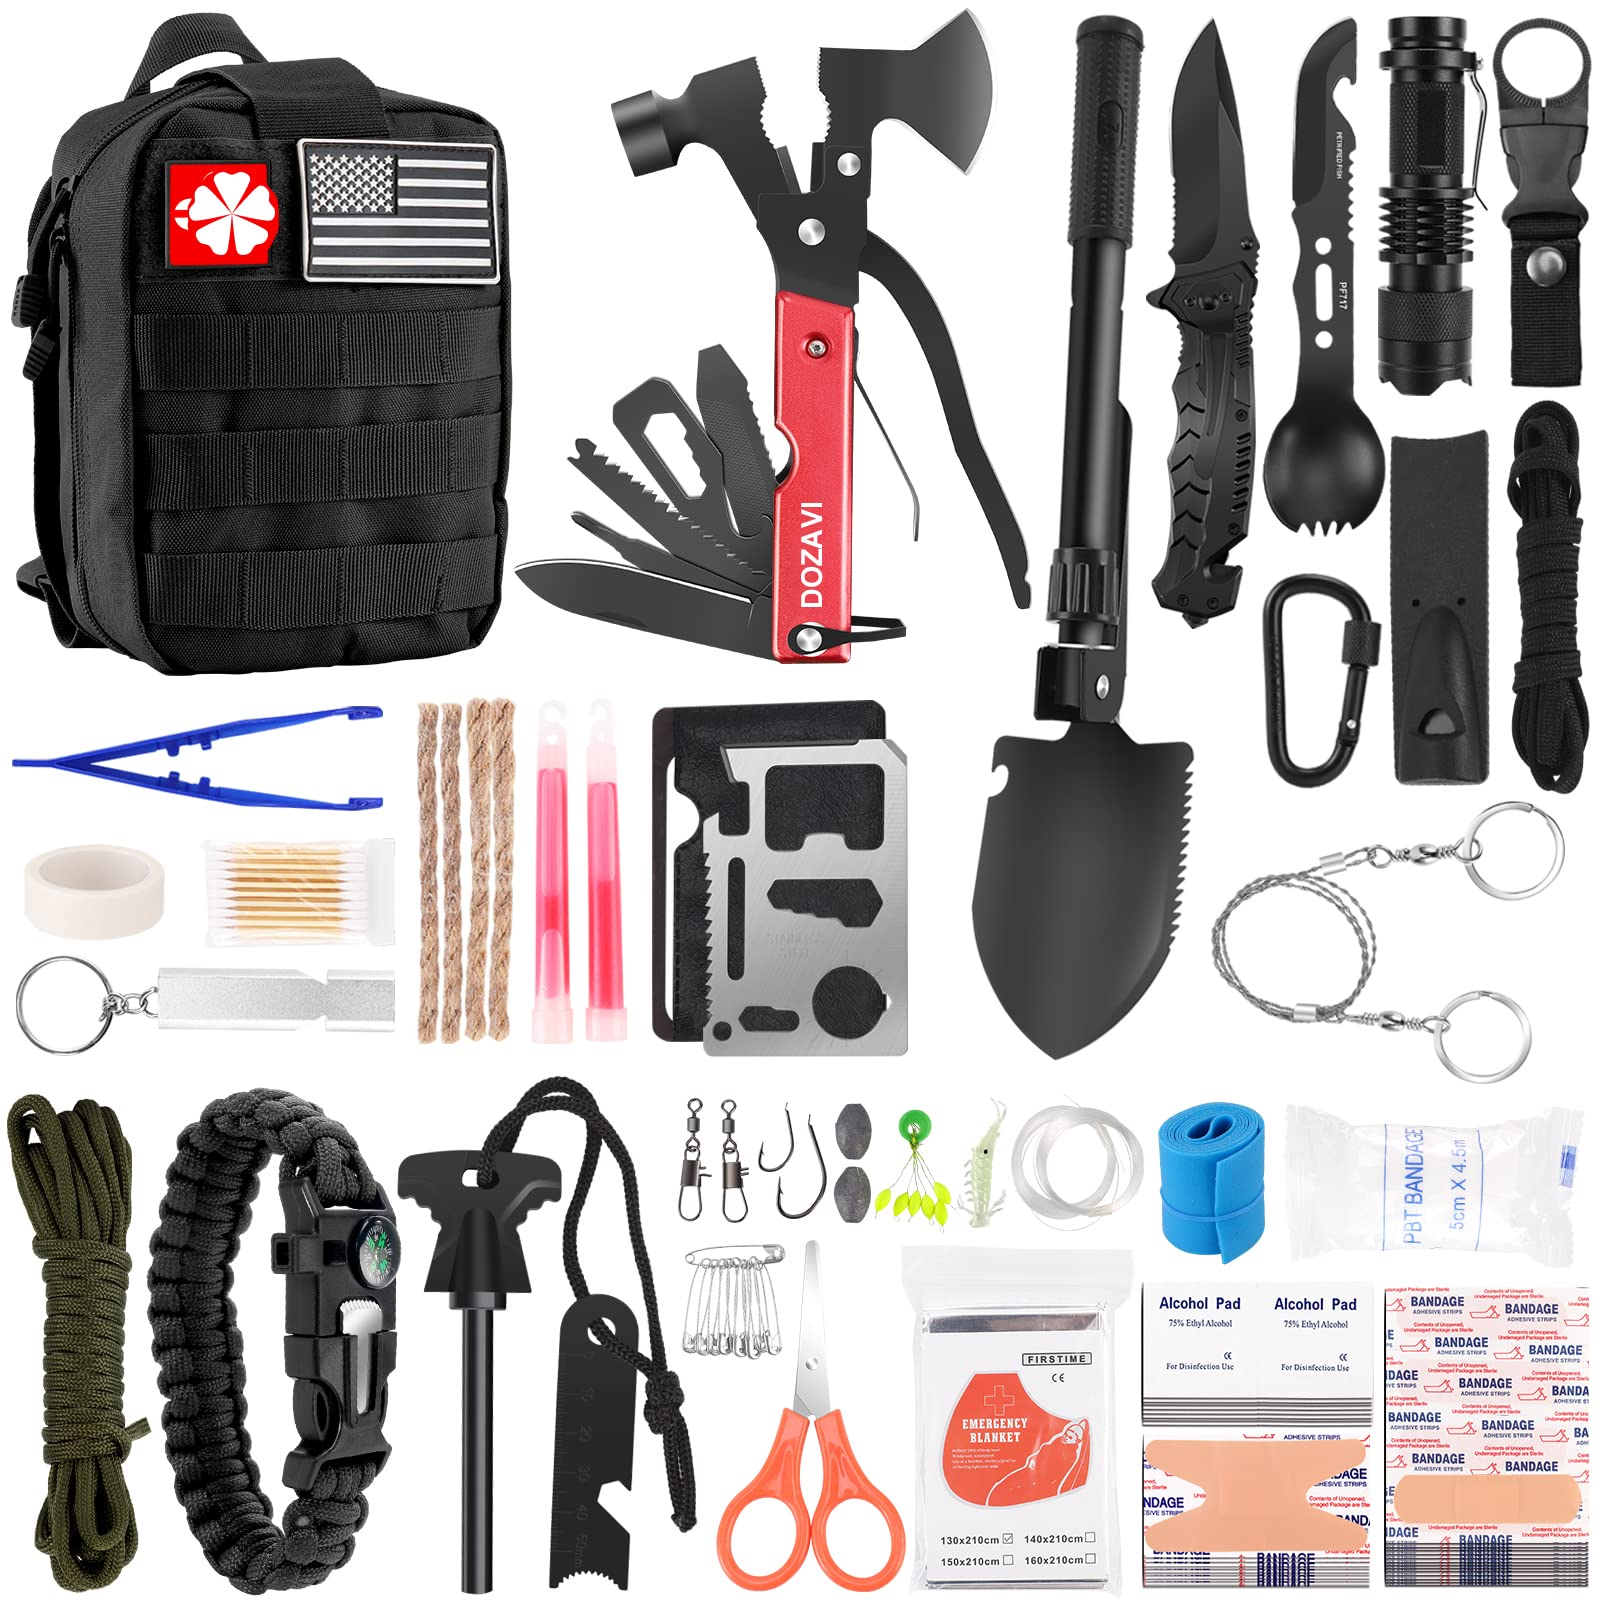  Emergency Survival Kit 176pcs Gifts for Men Dad Husband Survival  Gear Tool Kit Survival Tool Emergency Blanket Tactical Pen Pliers for  Wilderness Camping Hiking First Aid for Earthquake : Sports 